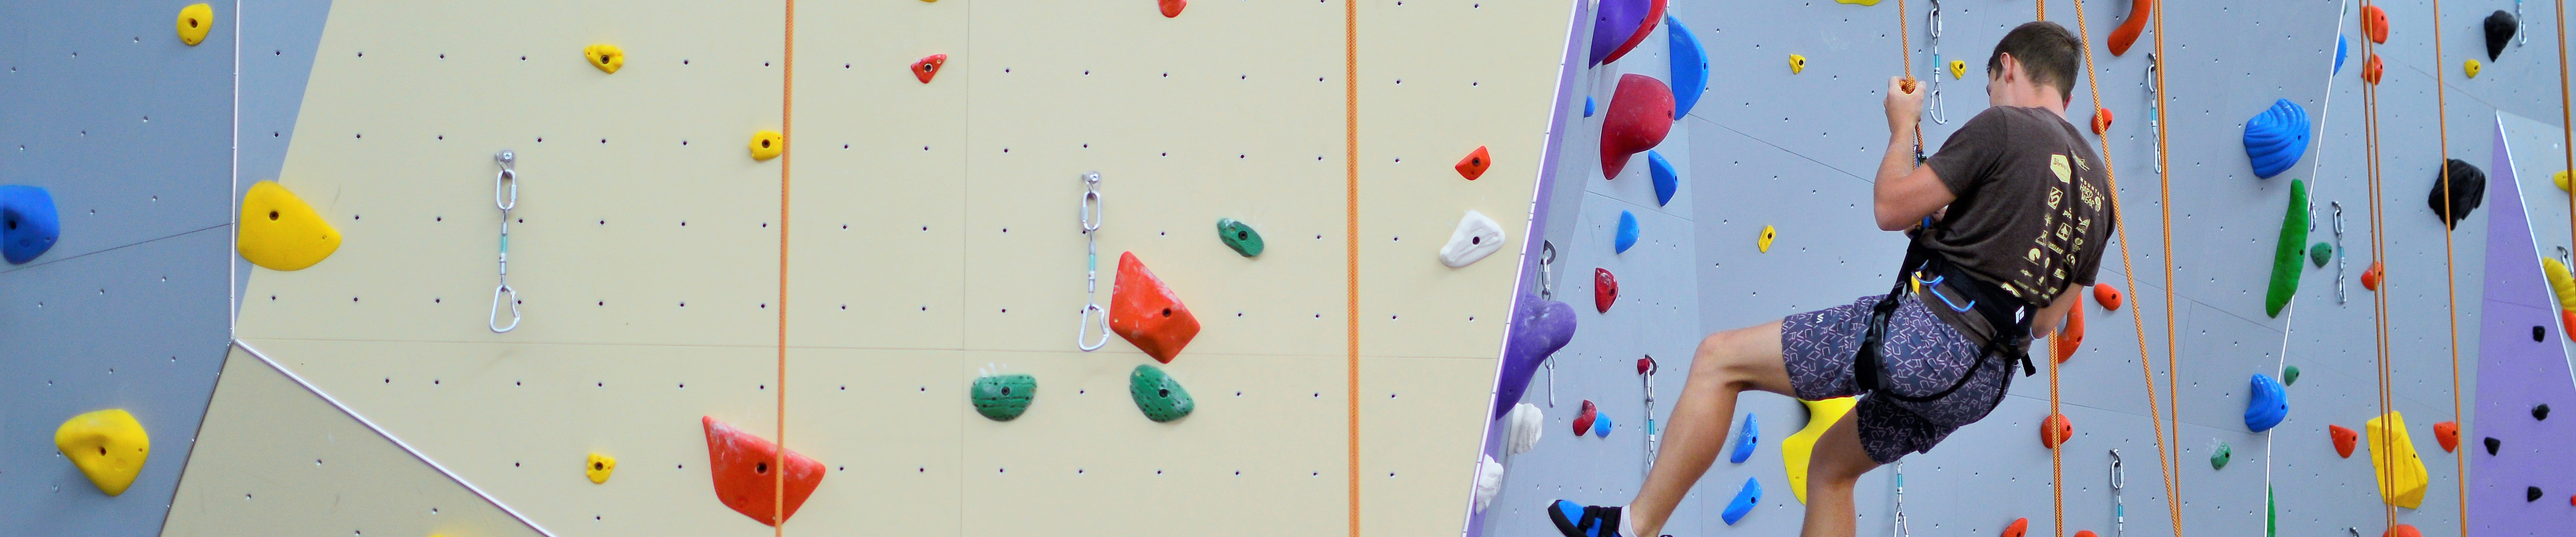 Rock Wall with Climber